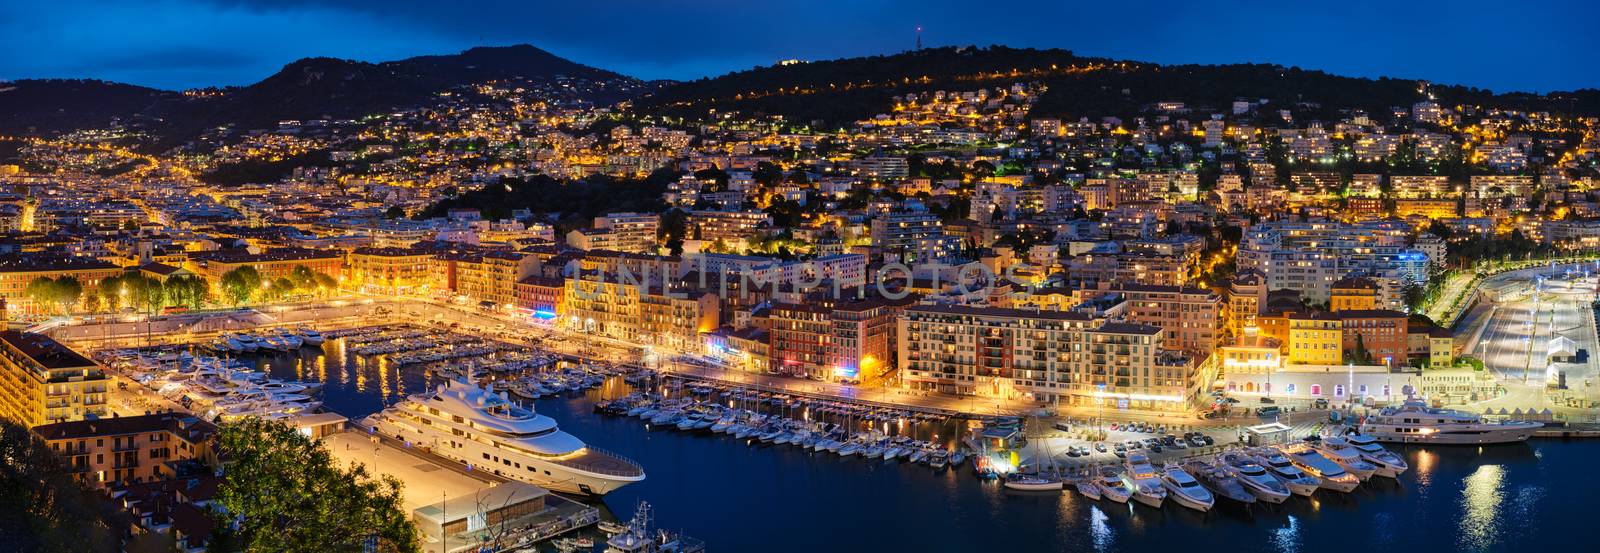 Panorama of Old Port of Nice with luxury yacht boats from Castle Hill, France, Villefranche-sur-Mer, Nice, Cote d'Azur, French Riviera in the evening blue hour twilight illuminated